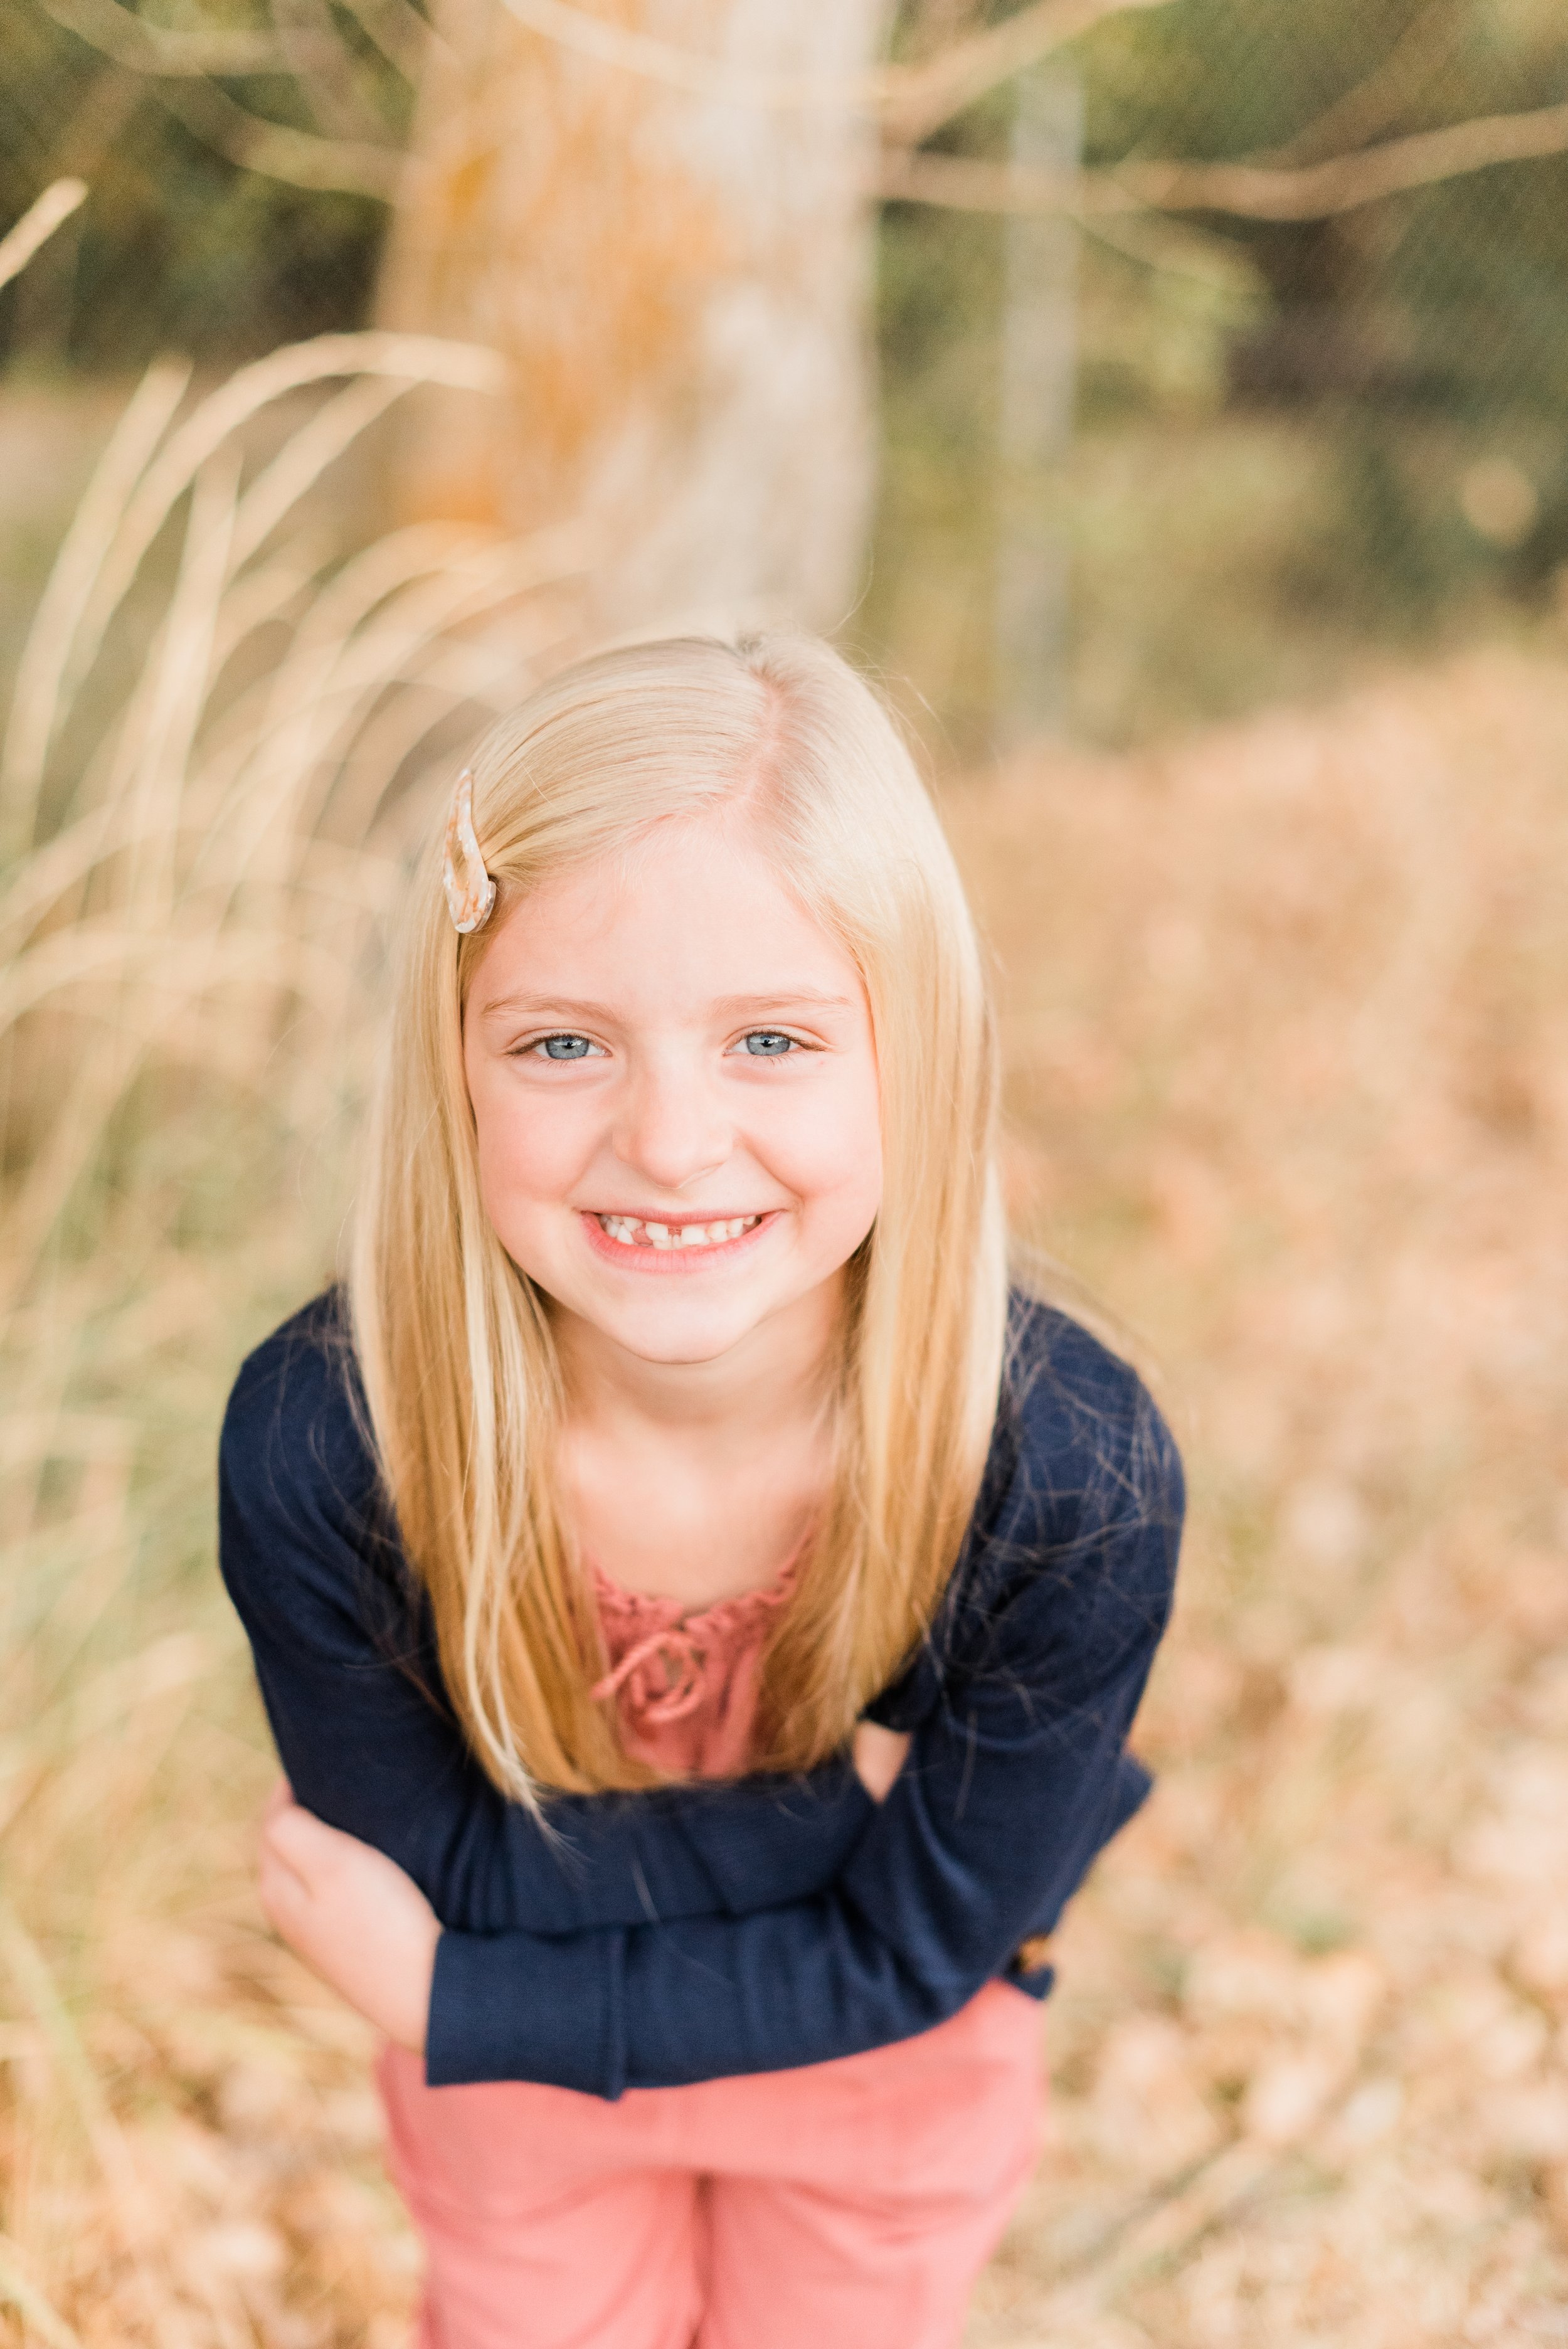  A sweet blonde little girl leans forward with her arms folded, smiling for her portrait photo taken by Jacquie Erickson, a Georgia-based family photographer. Posing guide Alpharetta GA momtog course &nbsp; #diyphotography #firstdayofschoolphotos #ca